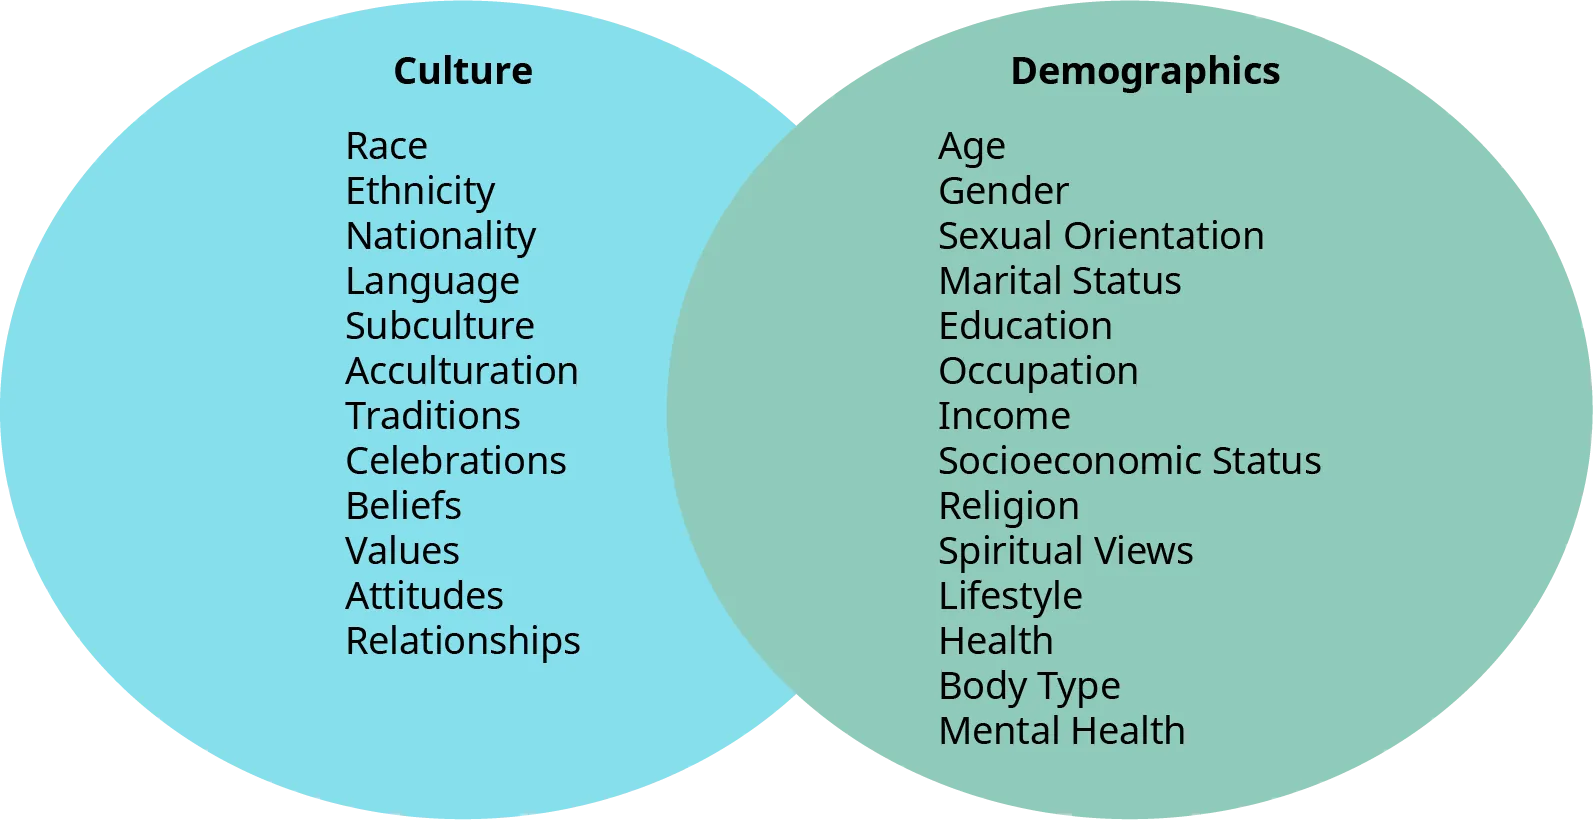 Diversity marketing dimensions are divided into two categories: culture and demographics. Included in culture are race, ethnicity, nationality, language, subculture, acculturation, traditions, celebrations, beliefs, values, attitudes, and relationships. Included within demographics are age, gender, sexual orientation, marital status, education, occupation, income, socioeconomic status, religion, spiritual views, lifestyle, health, body type, and mental health.